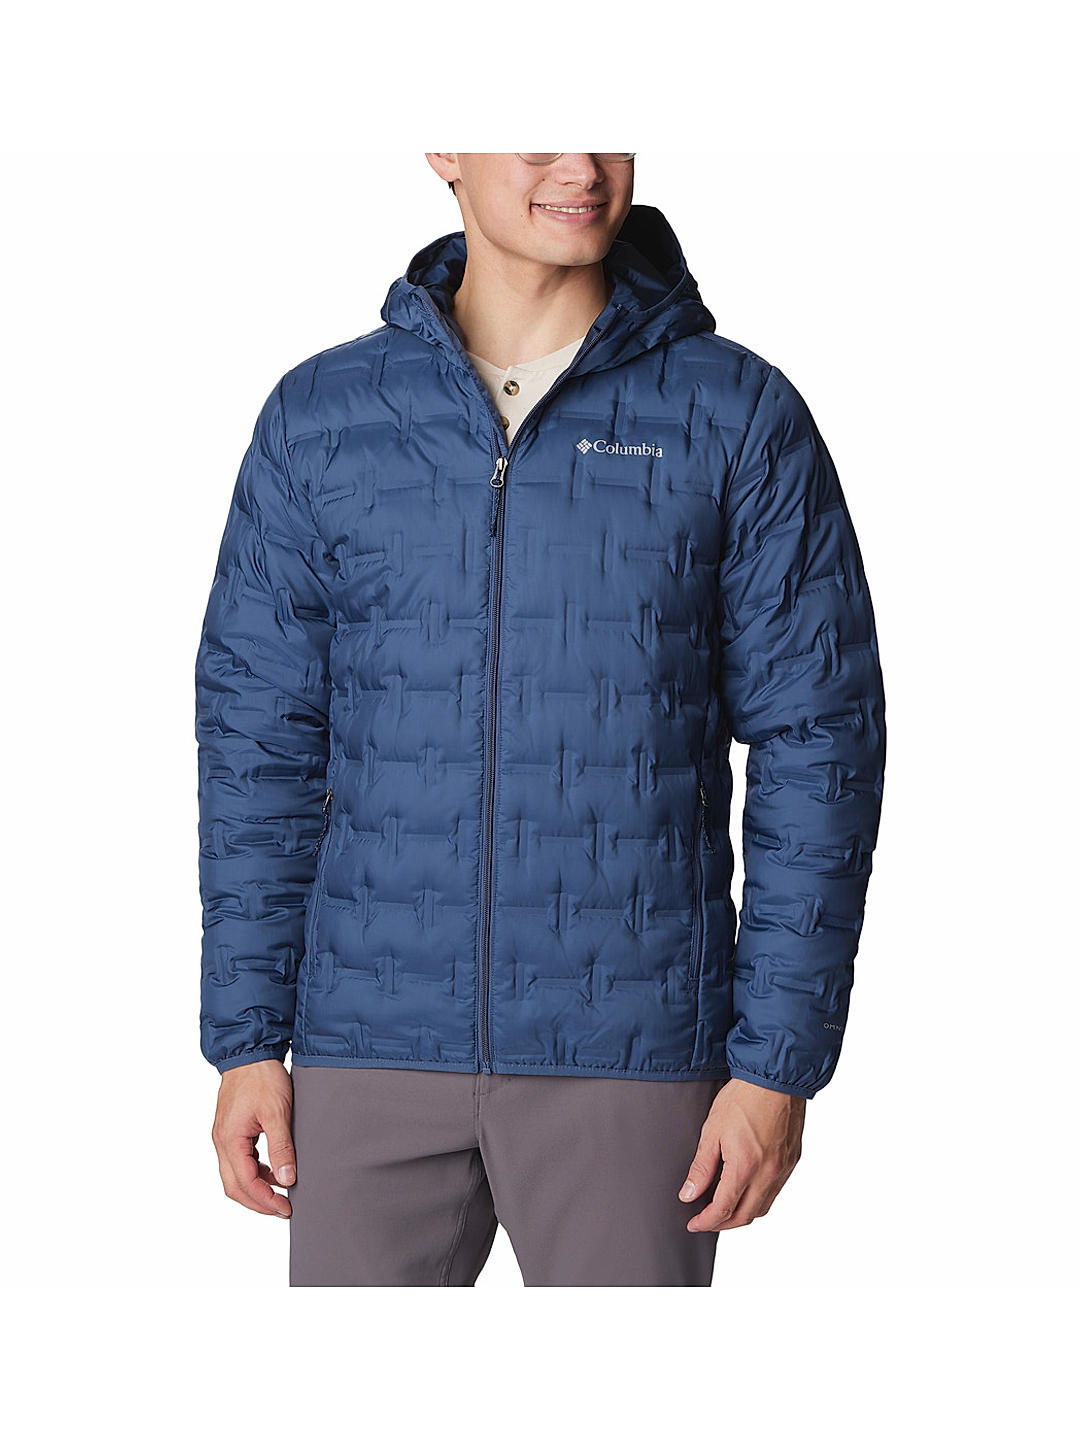 Columbia Omni-Shield Mens M Navy Blue All Weather Jacket Removable Hoodie  VGC